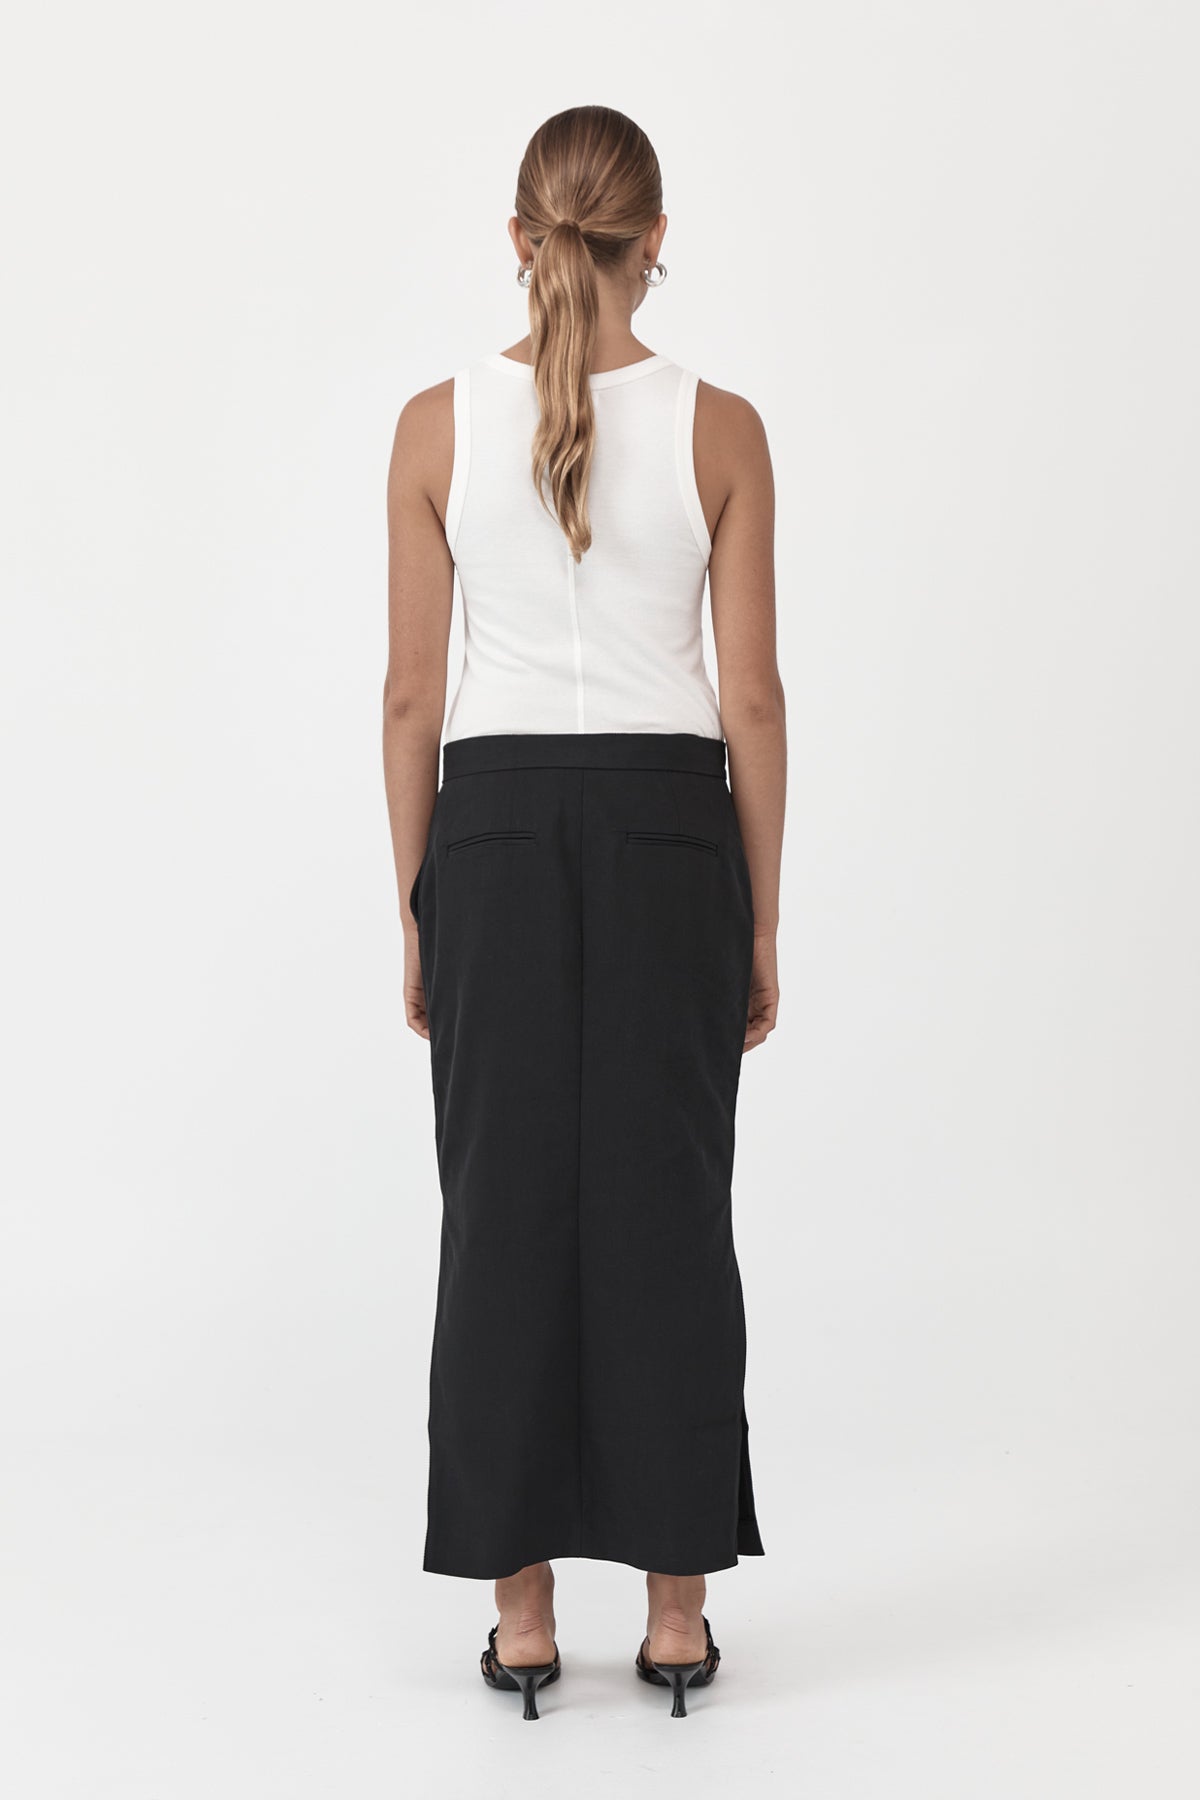 Low waisted Tailored Skirt - Black